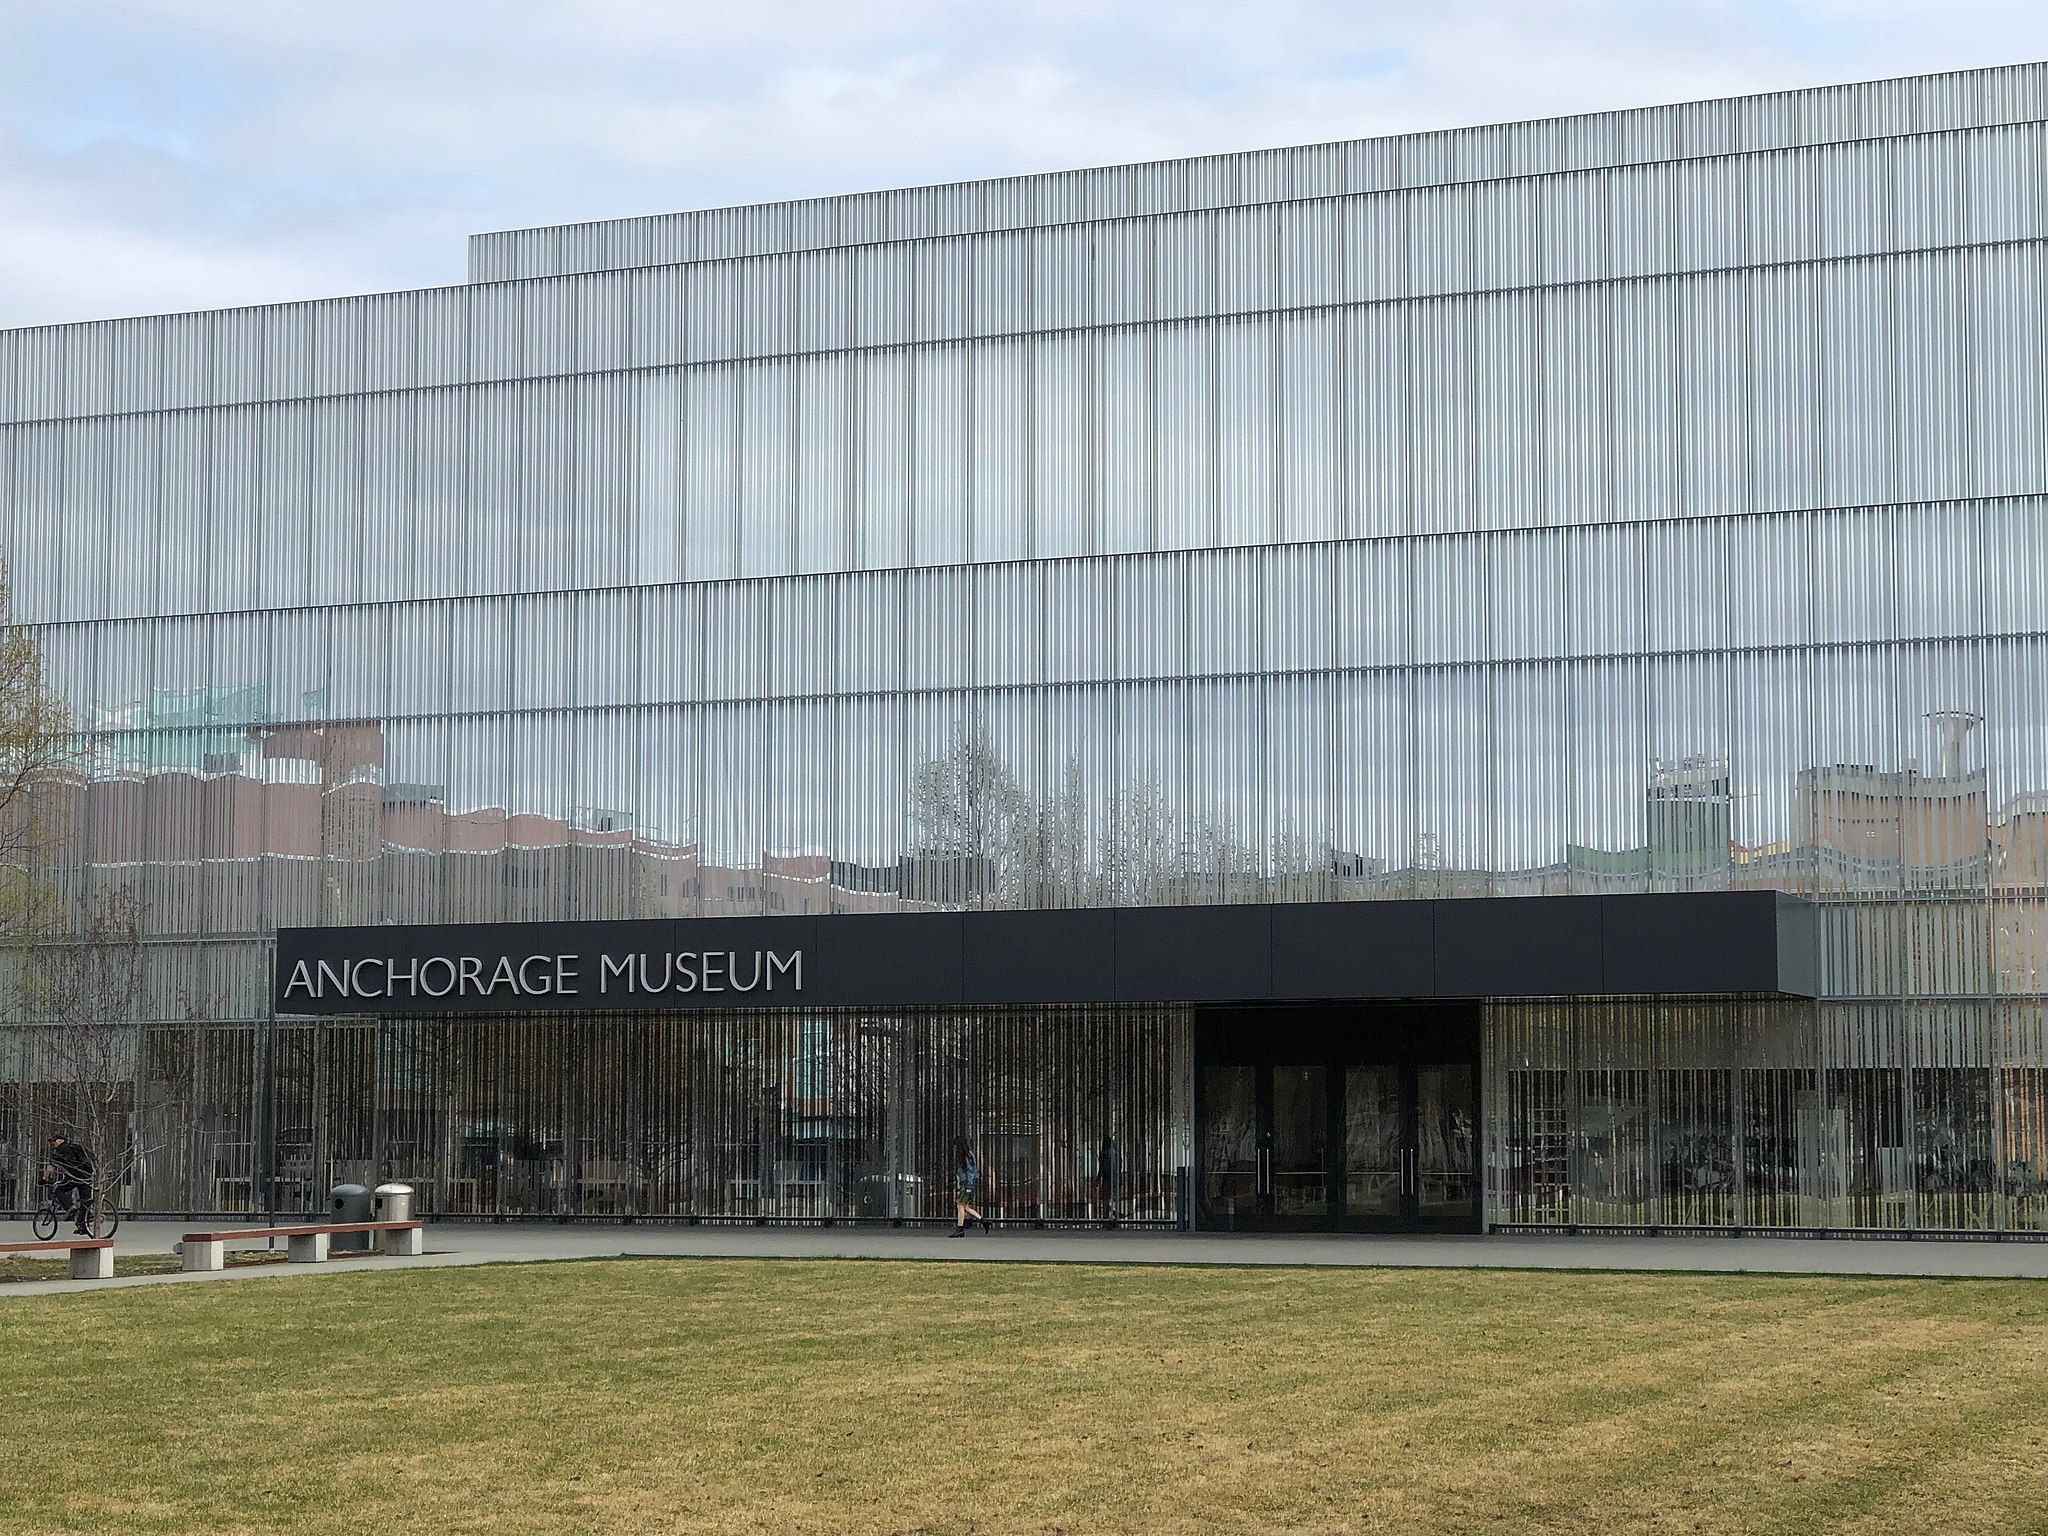 The facade of the Anchorage Museum, with lawn space visible.